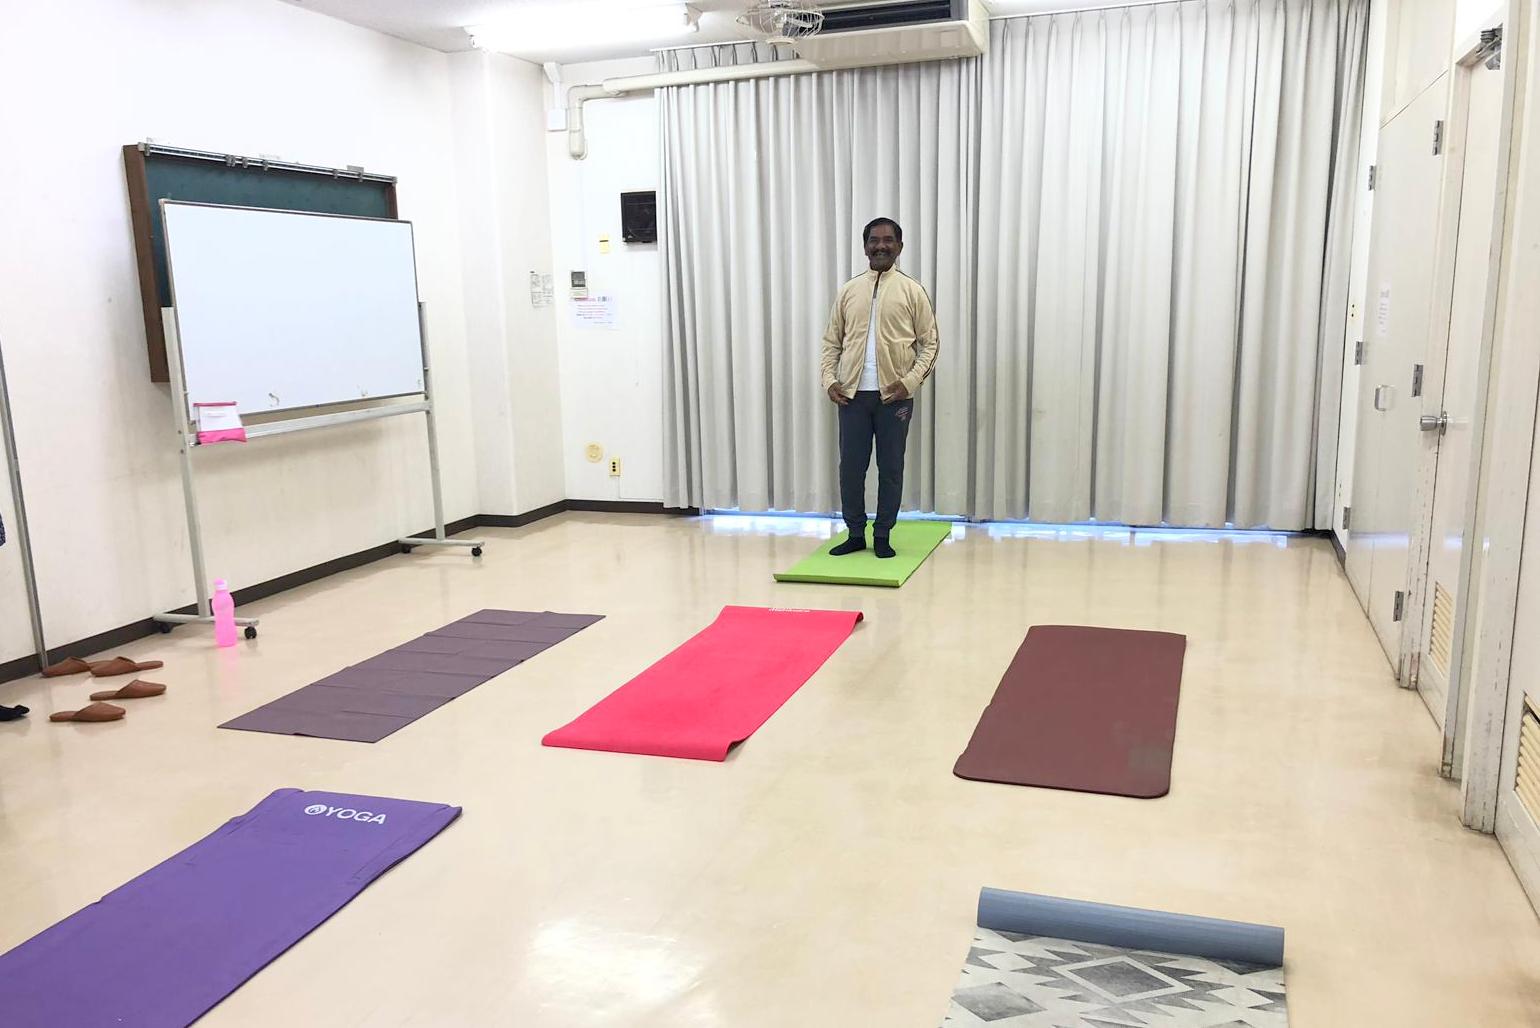 Yoga session conducted – Retd. Superintendent of Police/Father from Bangalore spreading his Yoga expertise in Japan